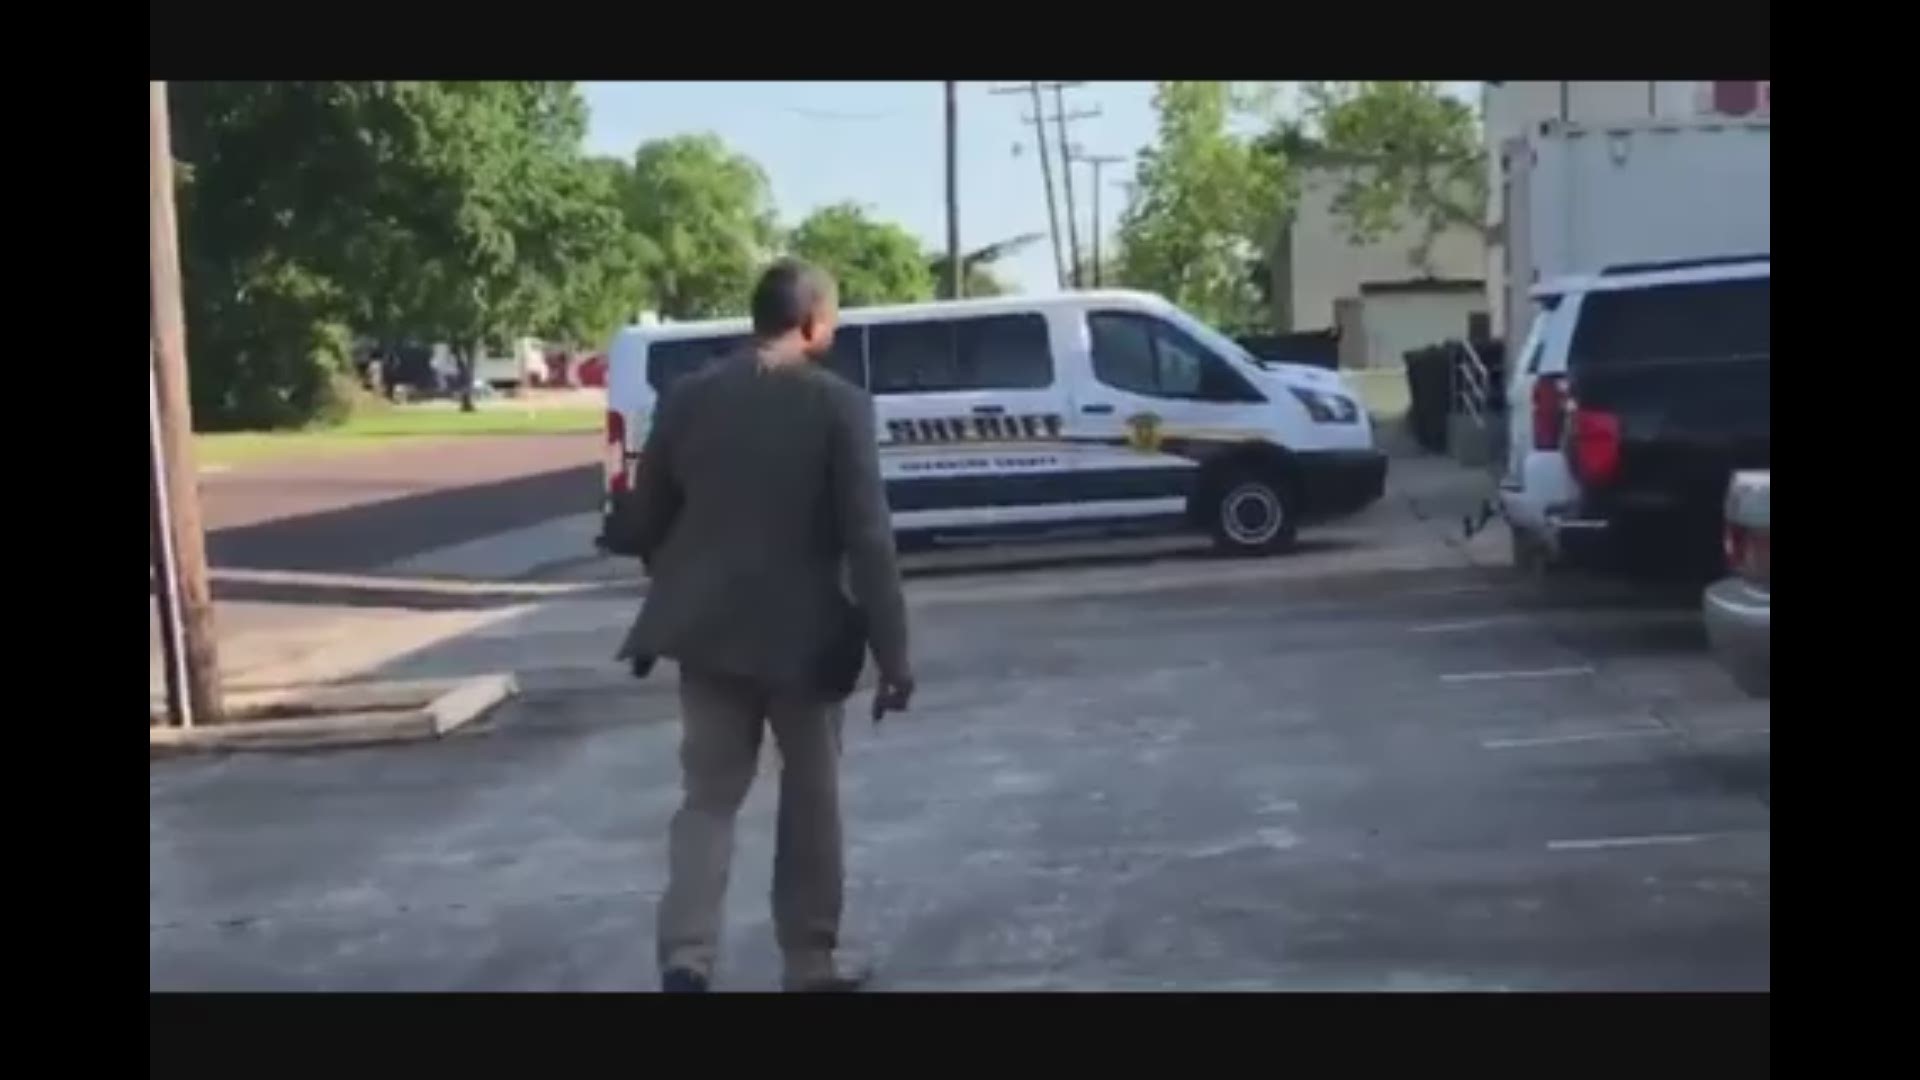 Former candidate for sheriff Joe 'QB' Stevenson leaves the Chambers County Courthouse